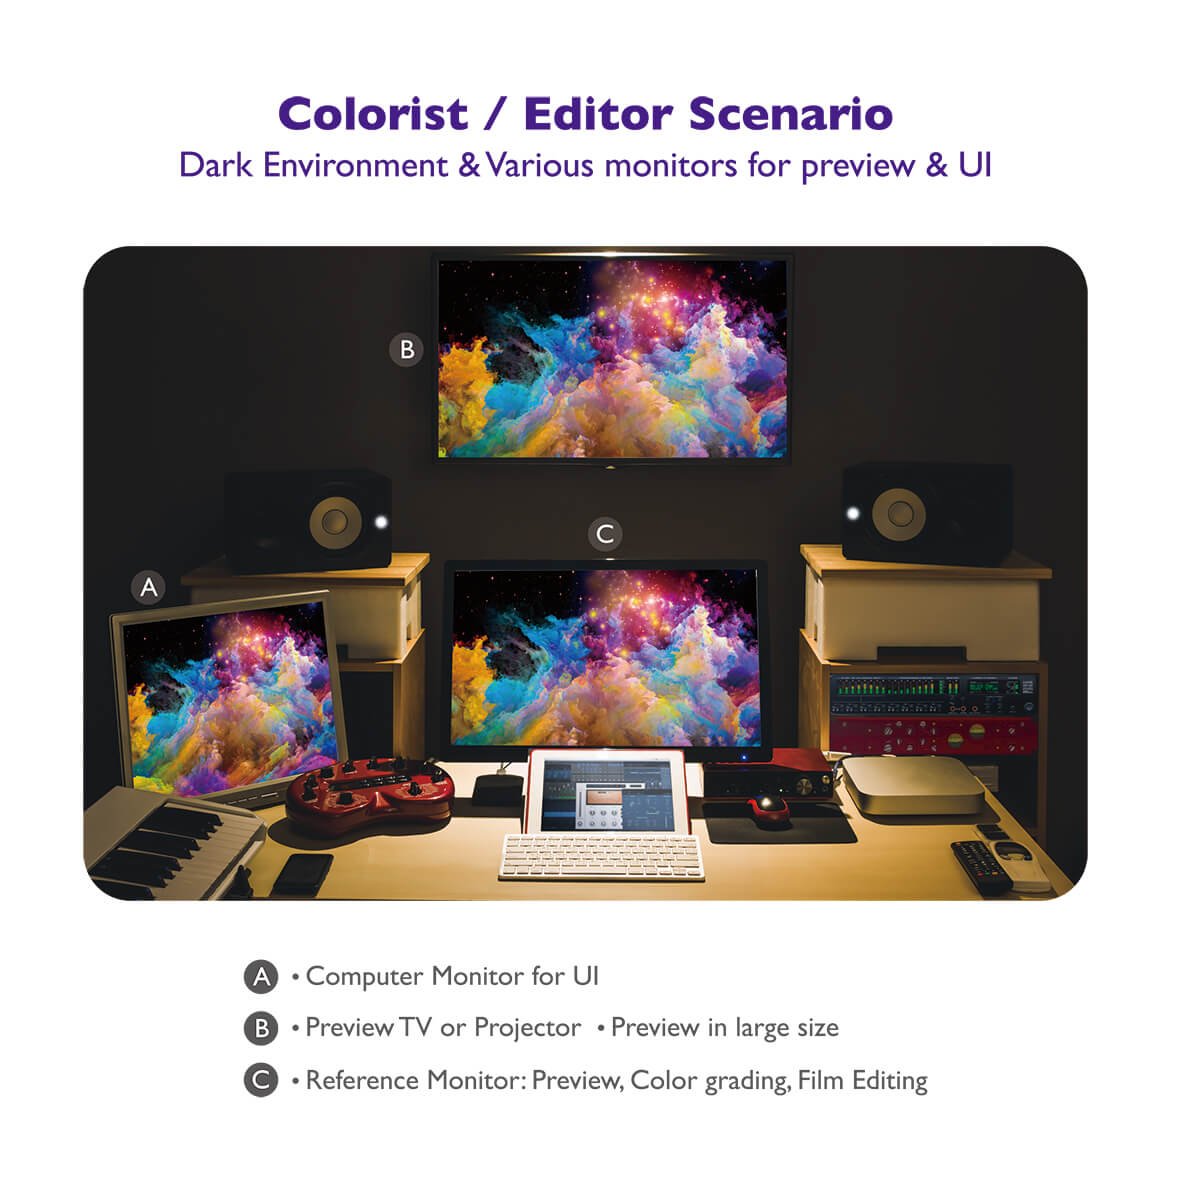 There are typical workstation setup including computer monitor for UI, preview TV or projector for image preview in large size and reference monitor for image preview, color grading and film editing for colorist.